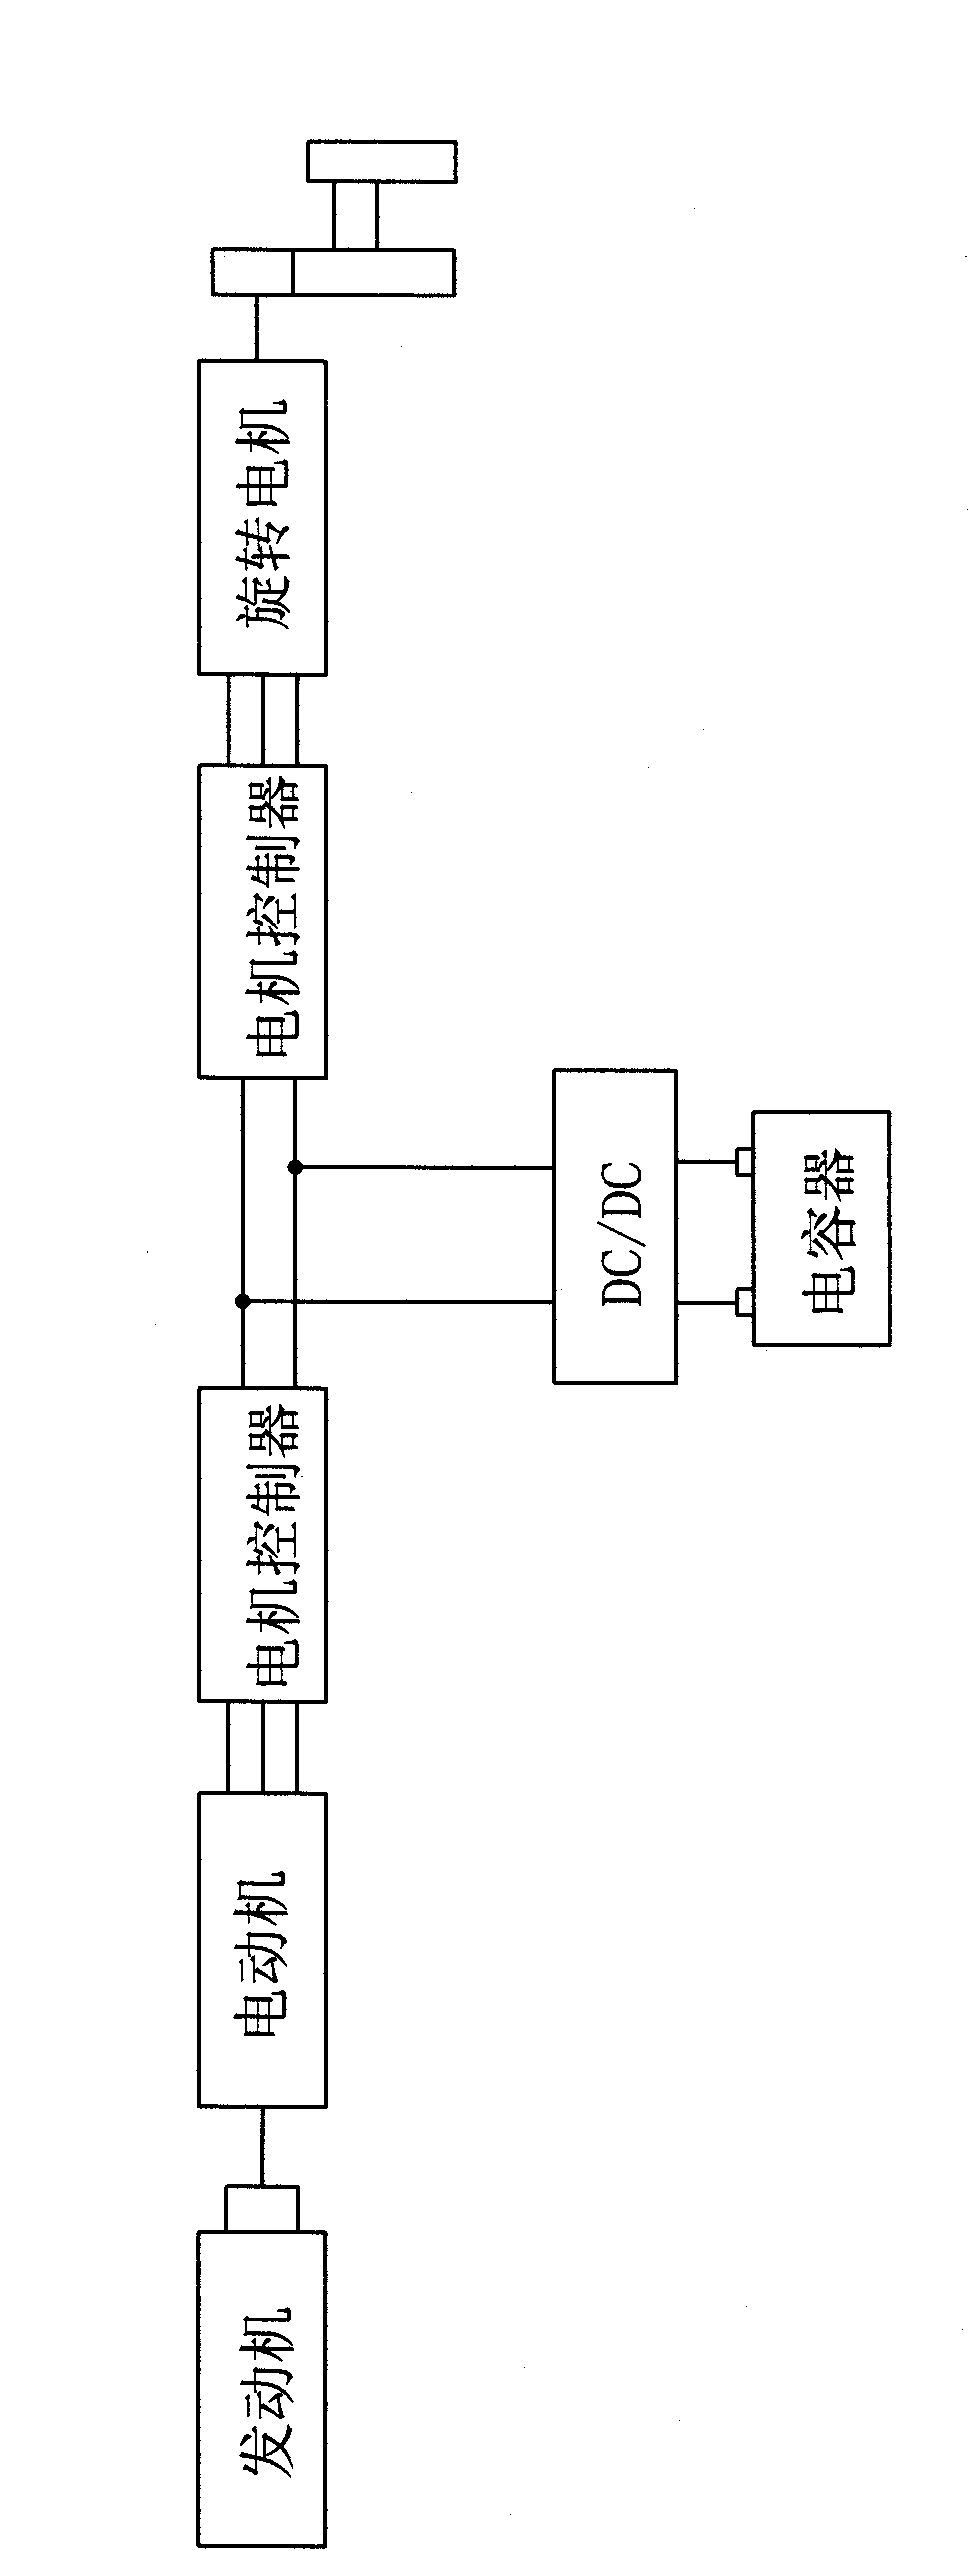 DC/DC control and drive circuit of hybrid power excavator